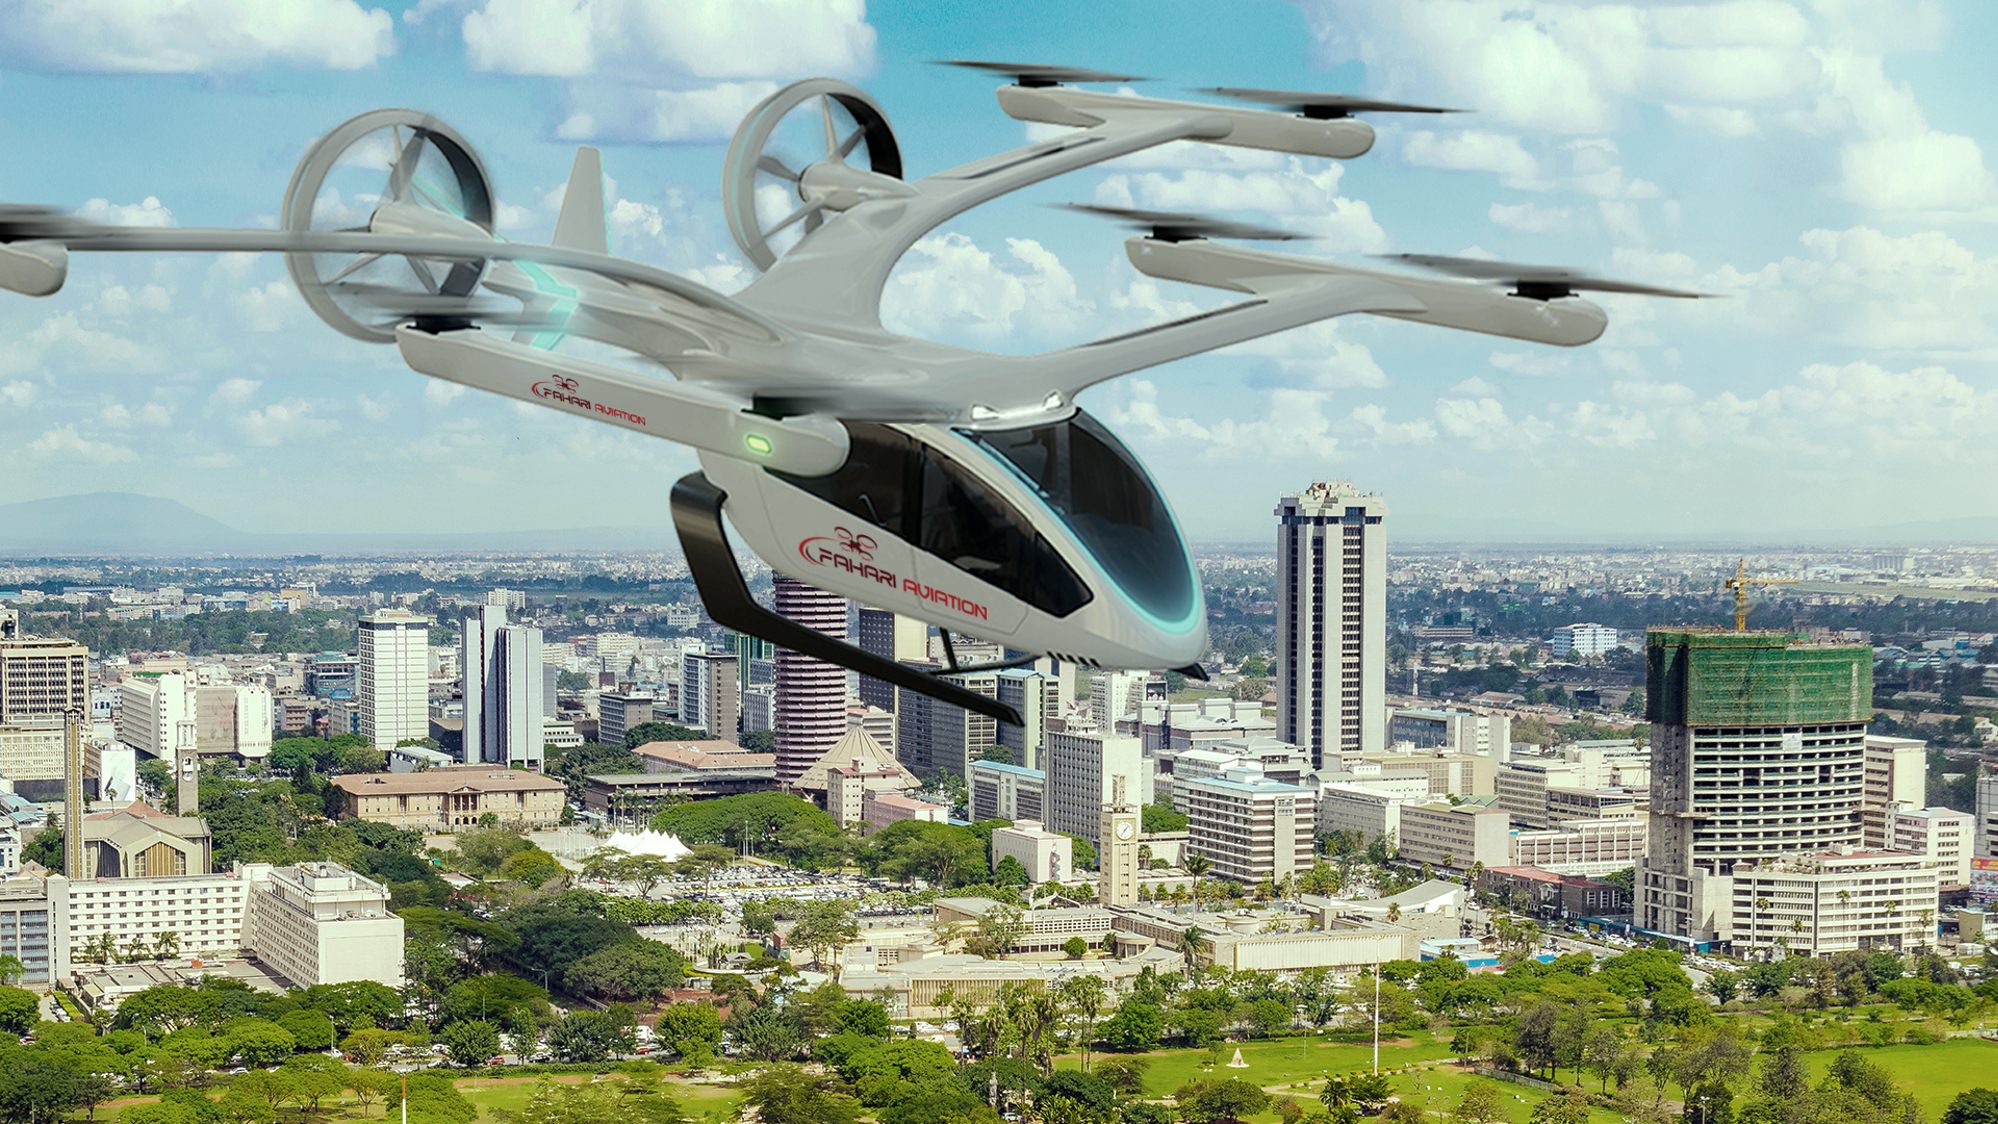 Embraer’s Eve and Kenya Airways Partner on the Future of Urban Air Mobility